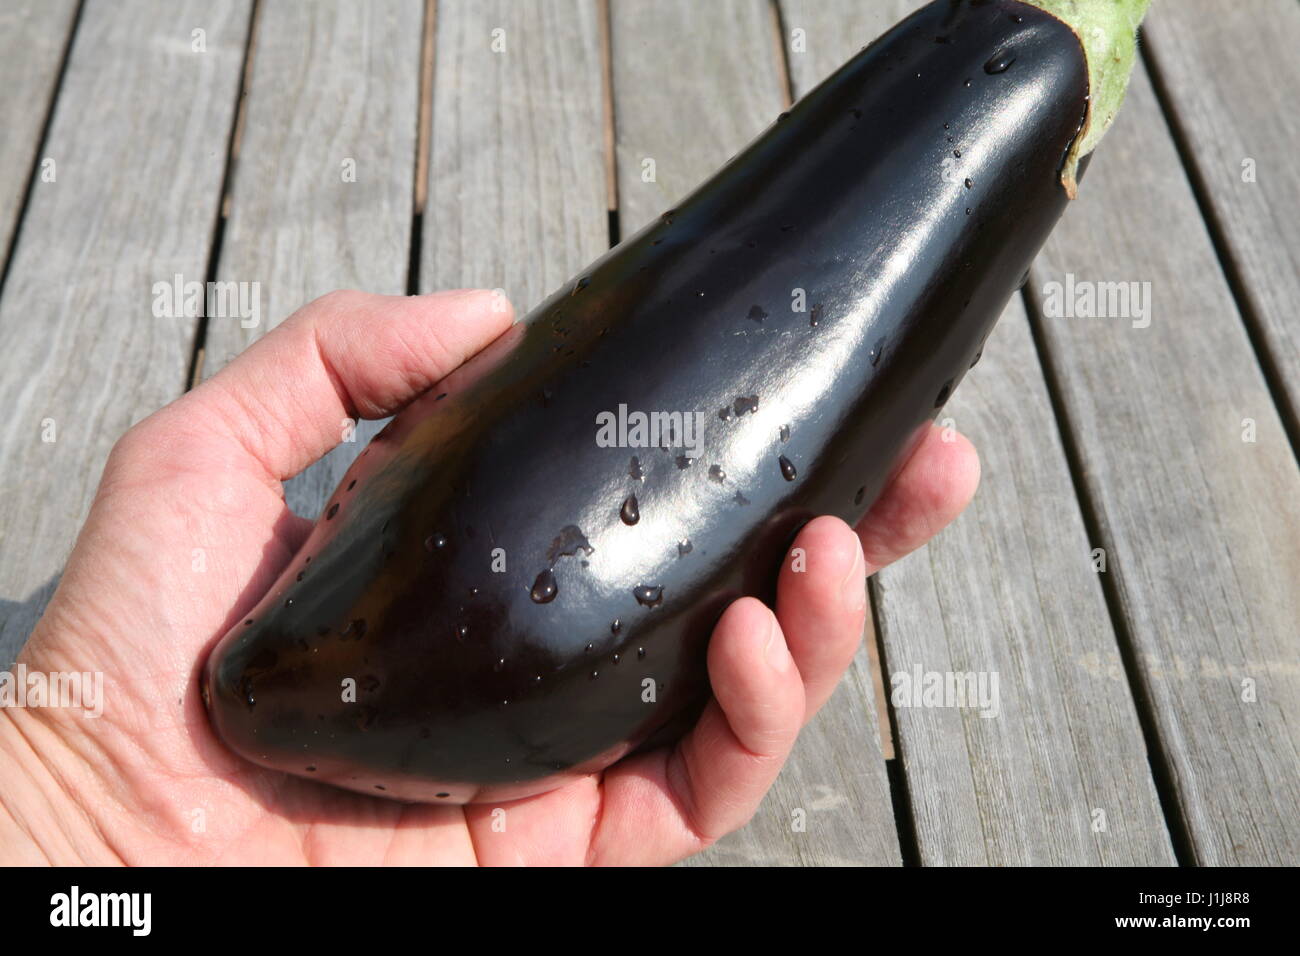 eggplant on wooden table Stock Photo